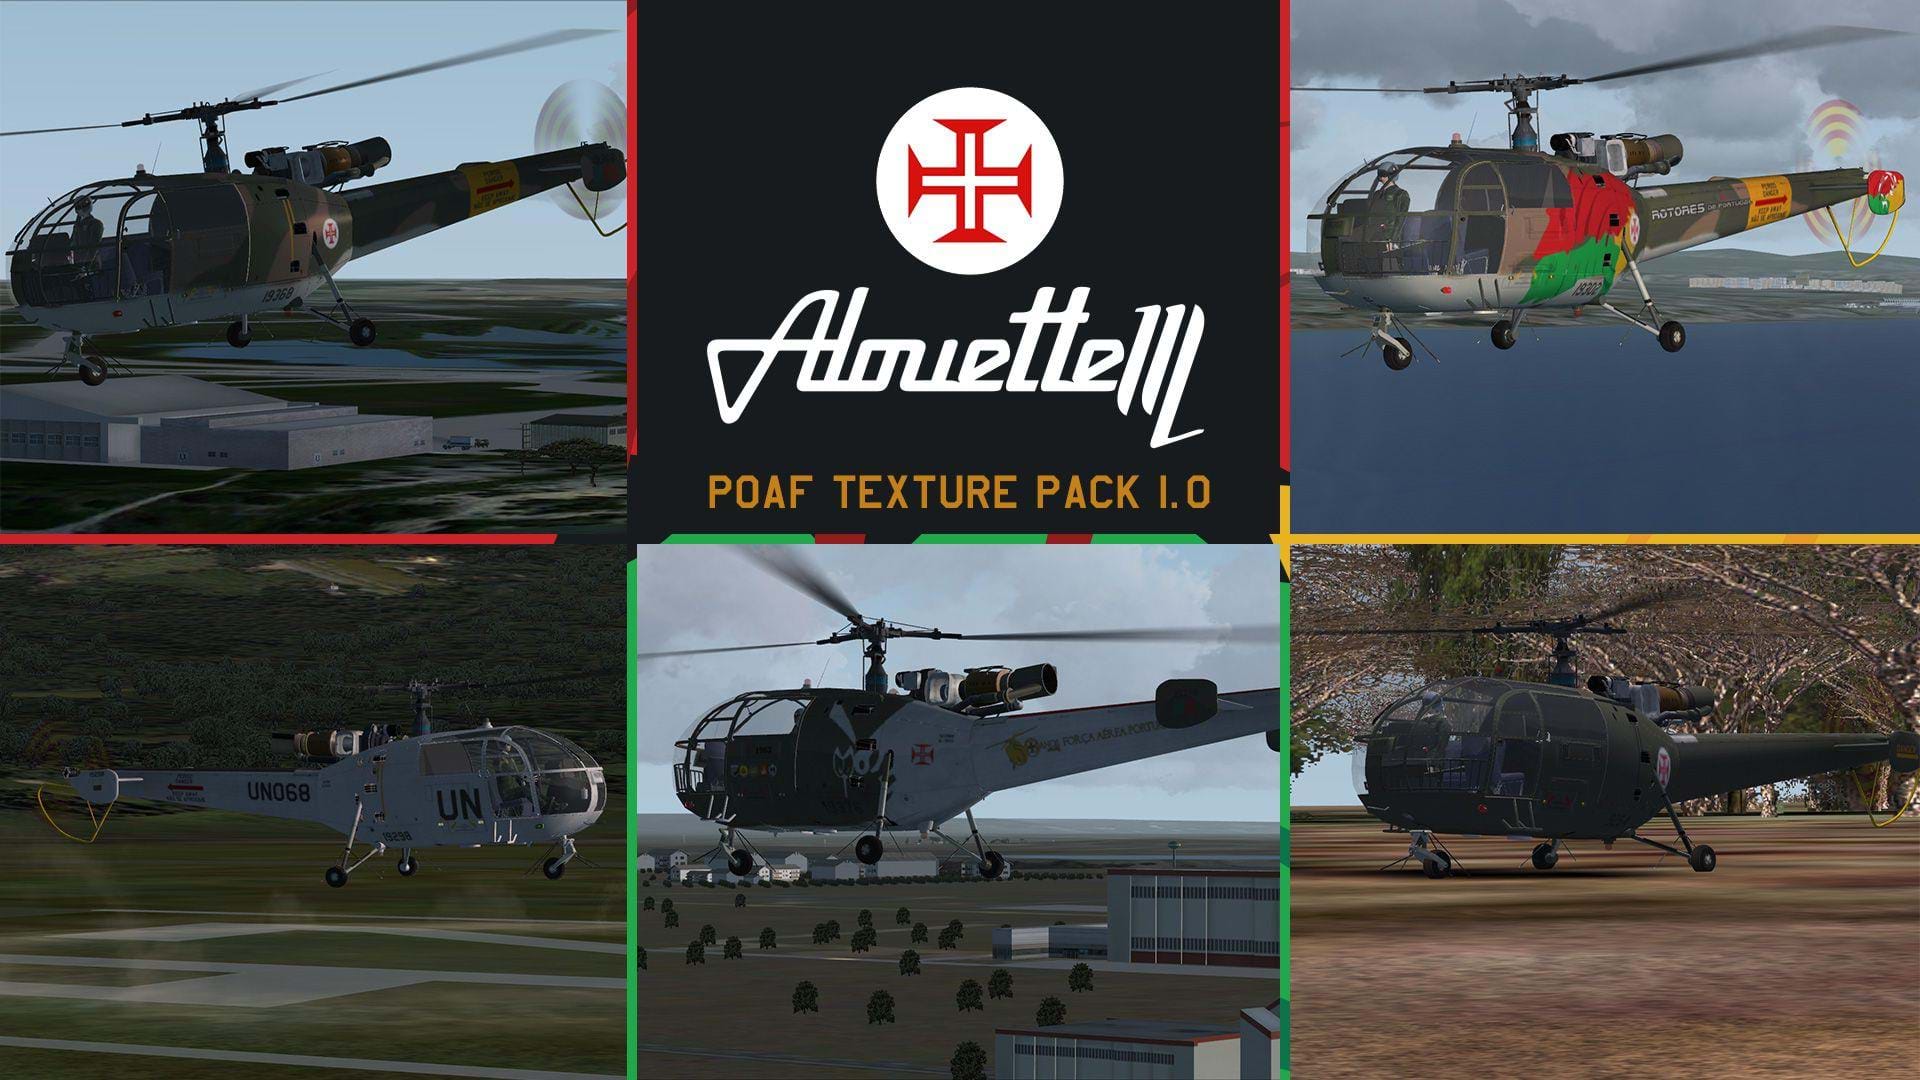 Alouette III PoAF Texture Pack 1.0